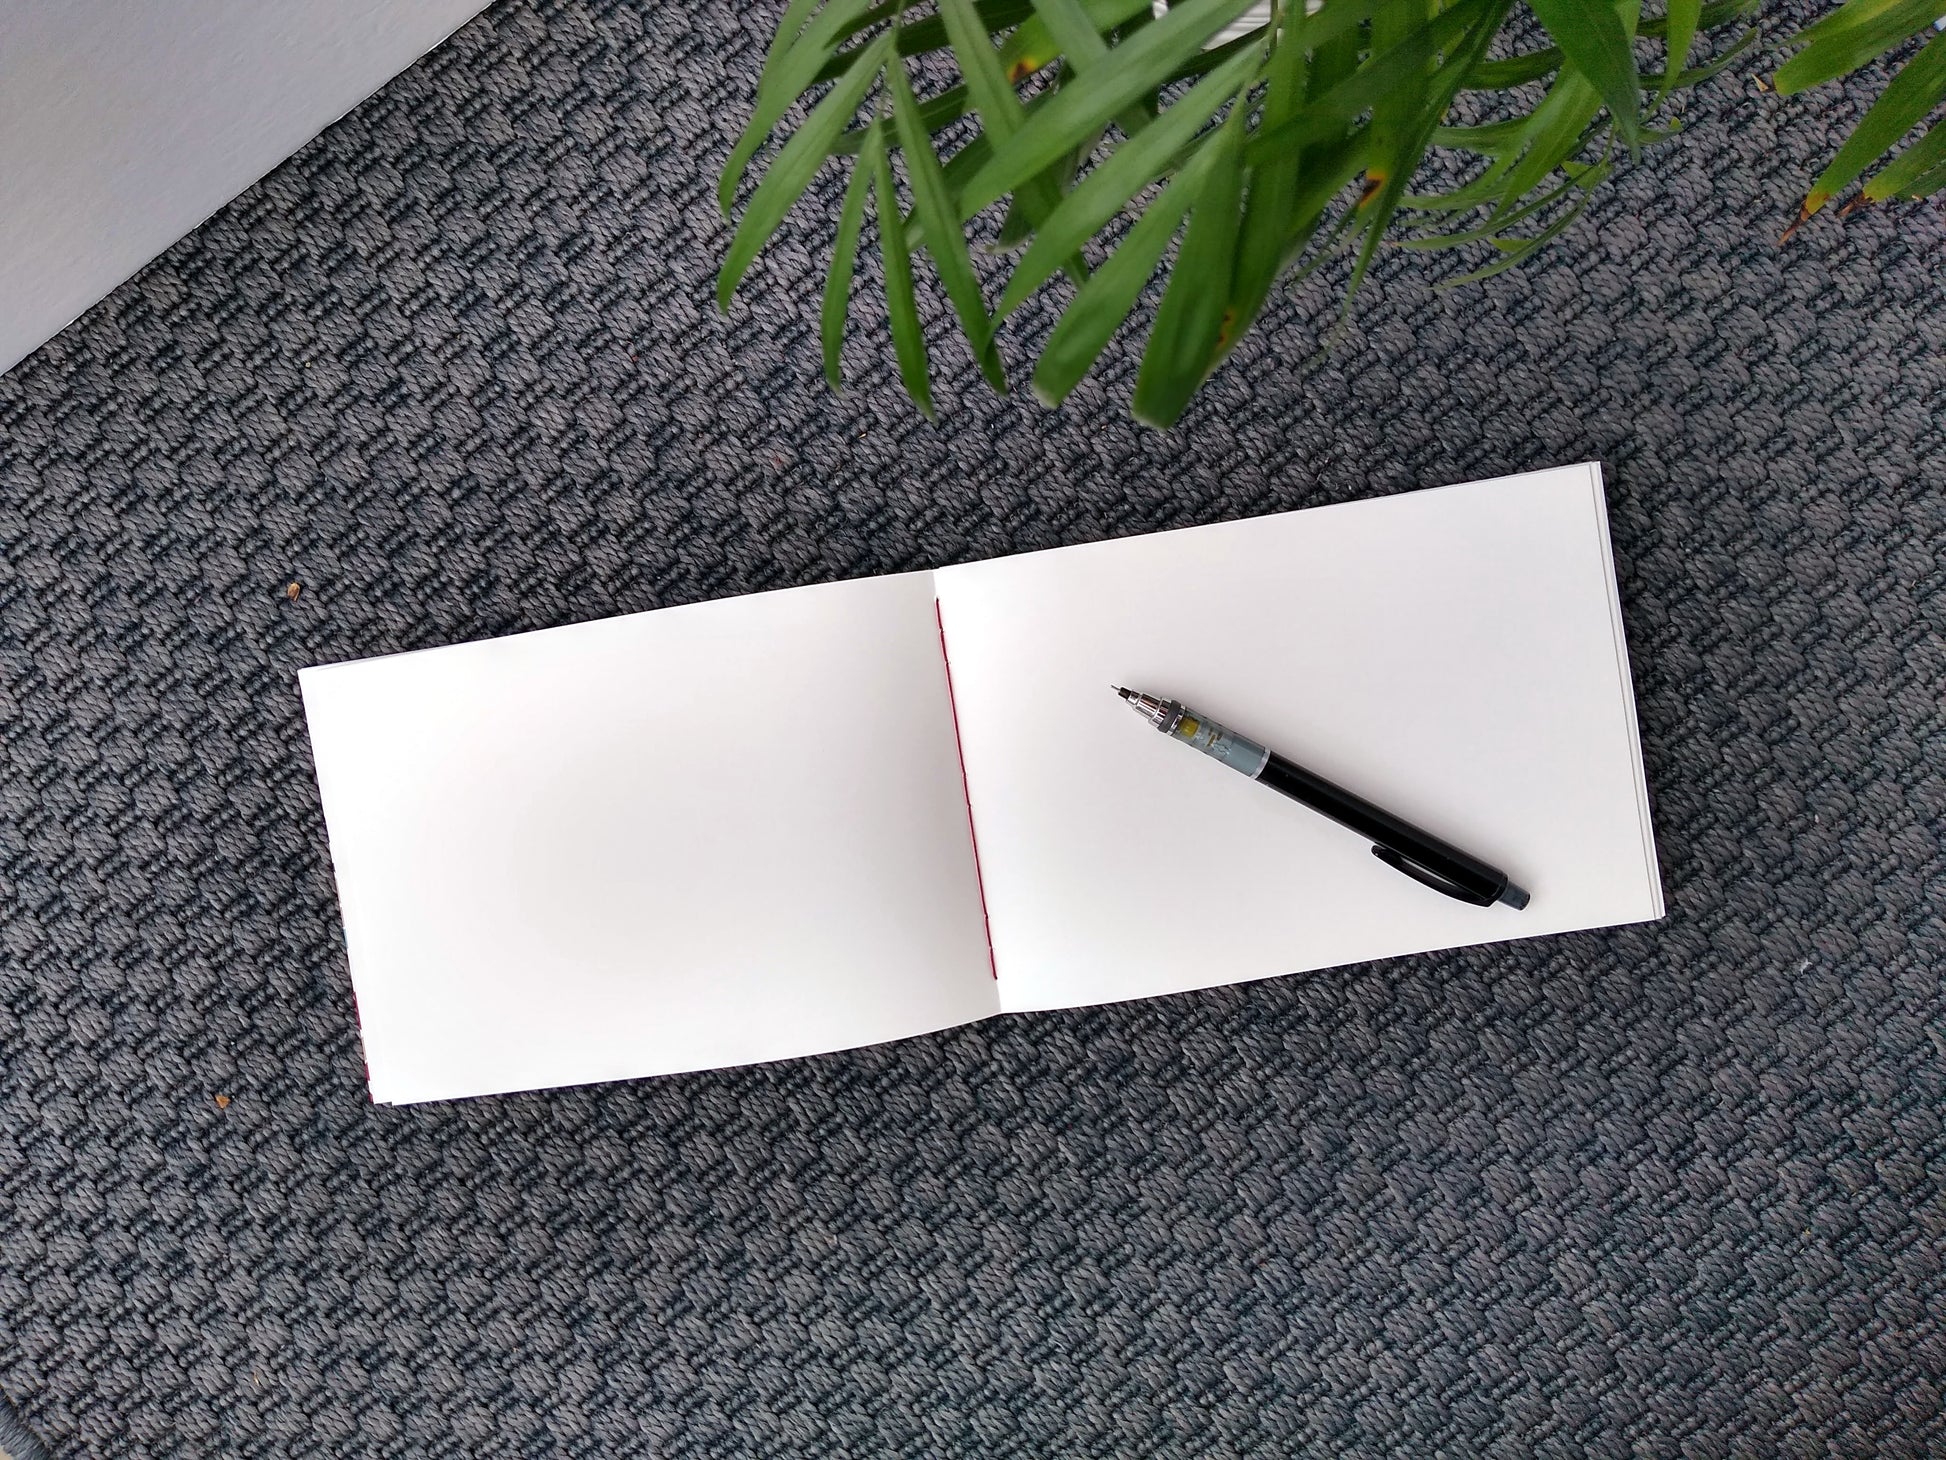 An open journal lays on a grey carpet next to a potted plant. The journal has a red thread connecting the pages at the spine and a black mechanical pencil rests across the blank white pages.